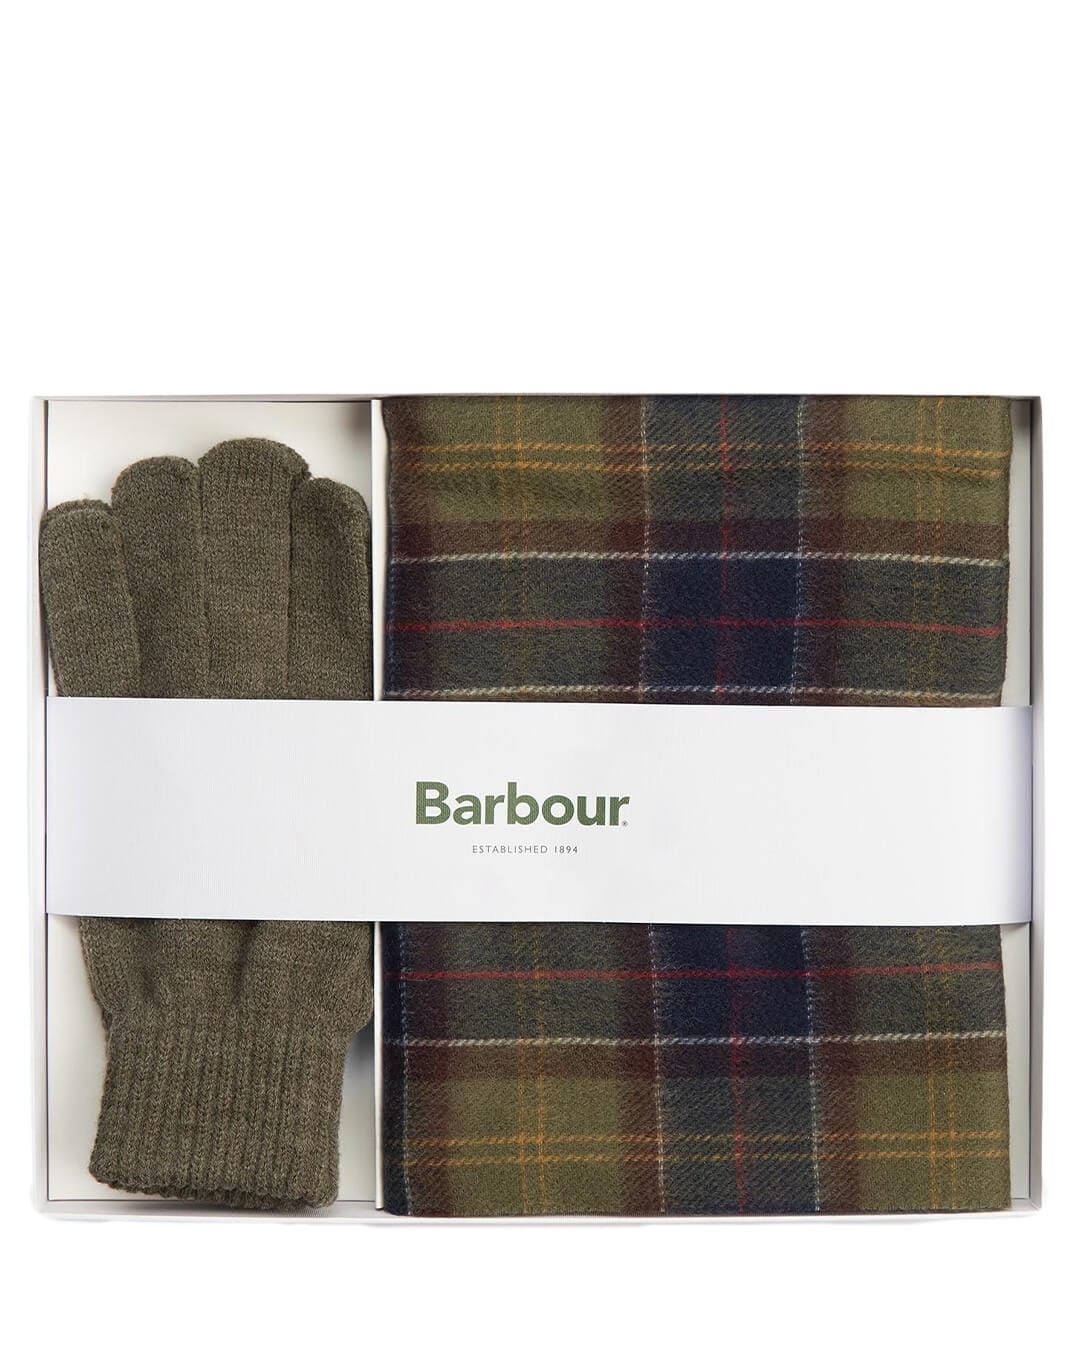 Barbour Gloves ONE Barbour Tartan Green Scarf And Glove Gift Set